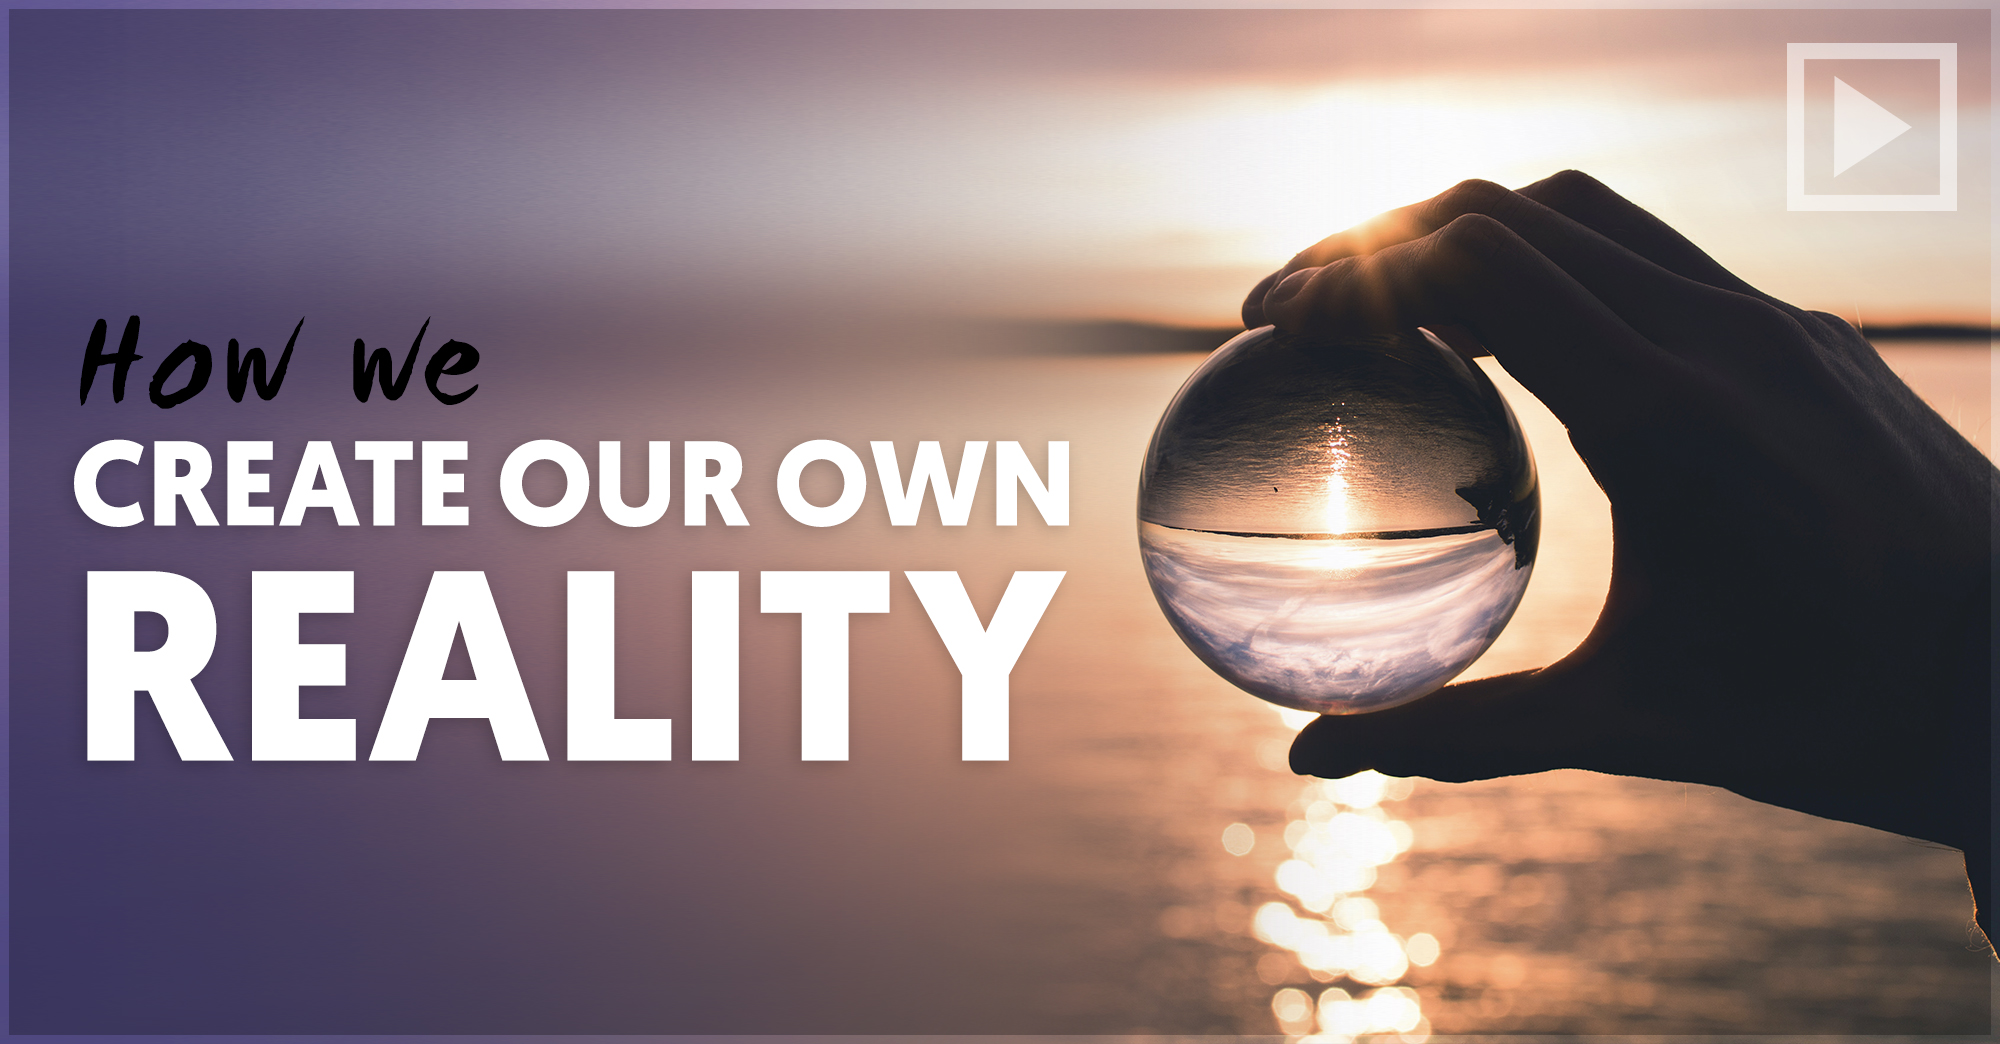 Real our life. Create your own reality. Our Creation. Our Faith creates our reality. Create your New reality.